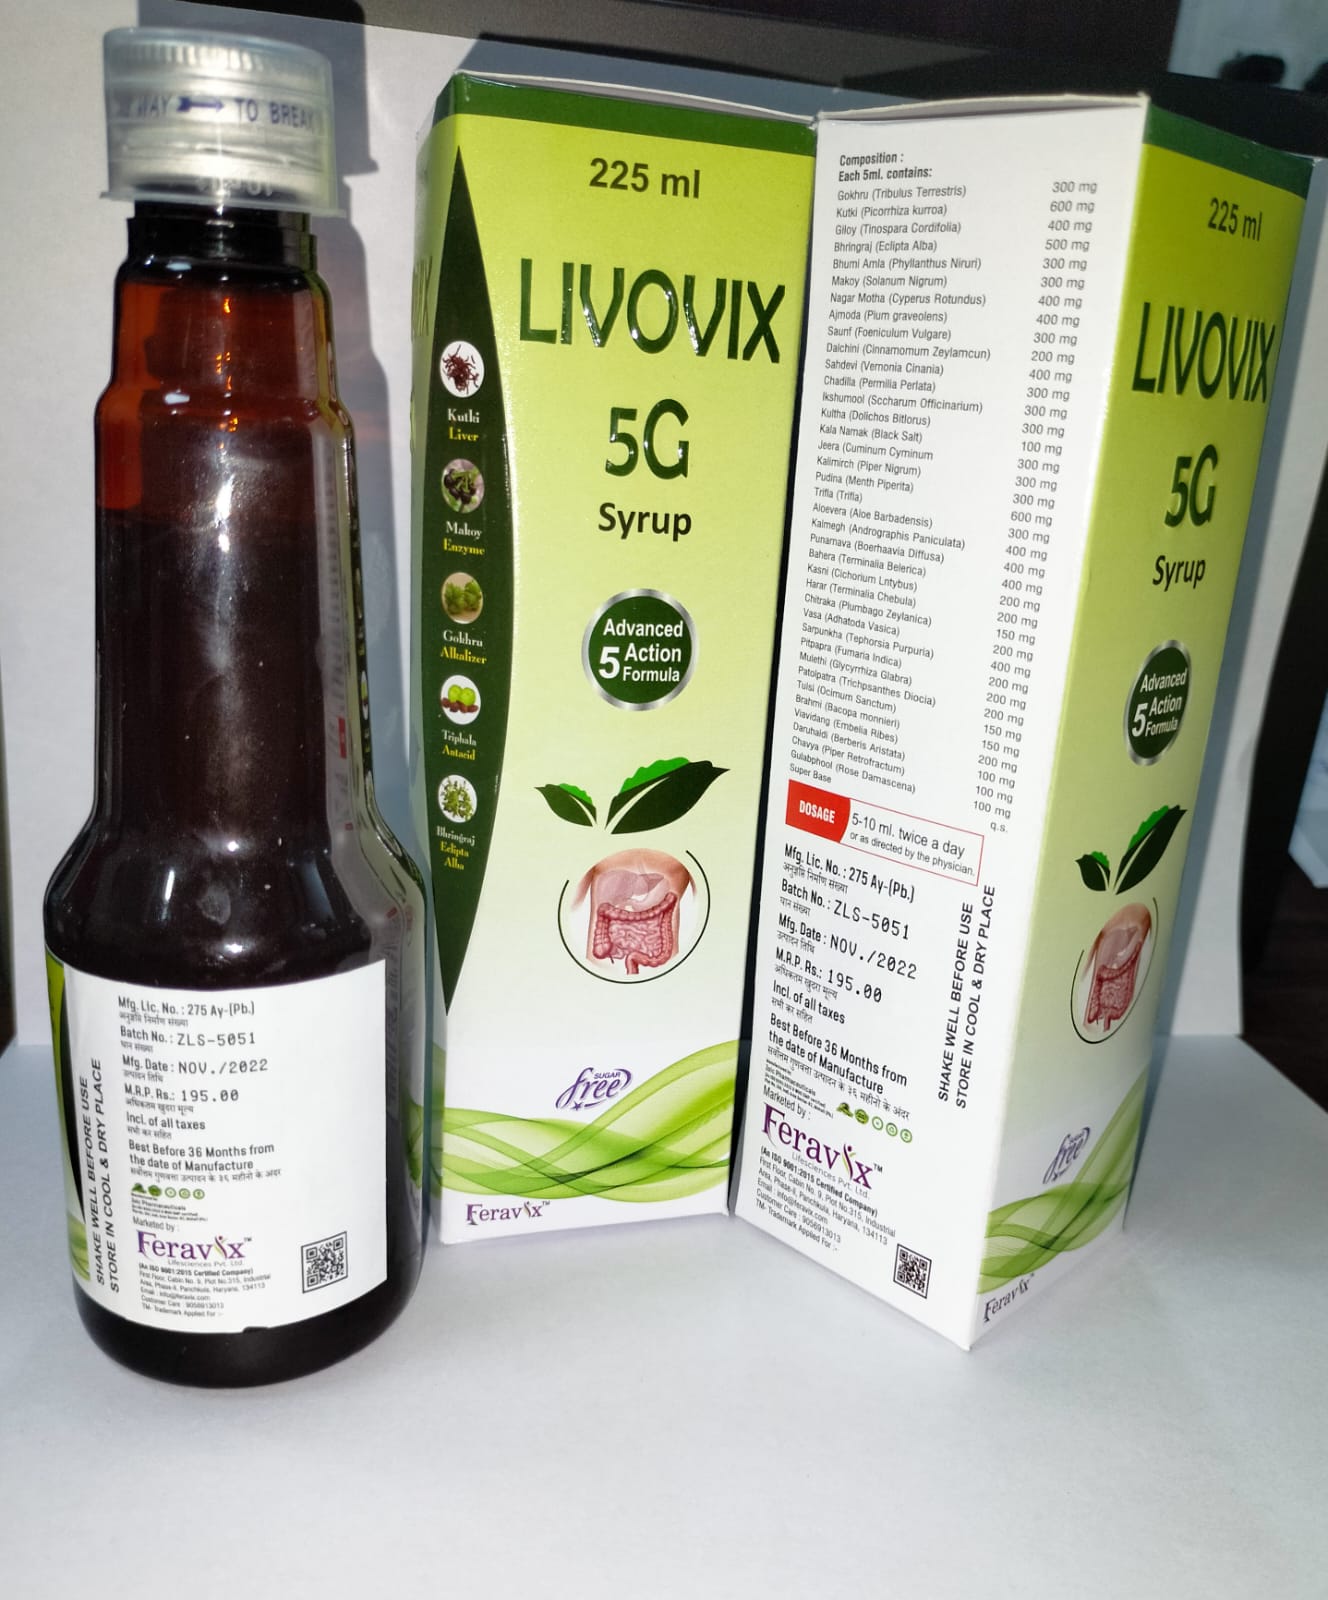 Product Name: LIVOVIX 5G Syrup, Compositions of LIVOVIX 5G Syrup are LIVER DS, ENZYME, ANTA ACID, ALKALISER, LAXATIVE EACH 5 ML - Feravix Lifesciences